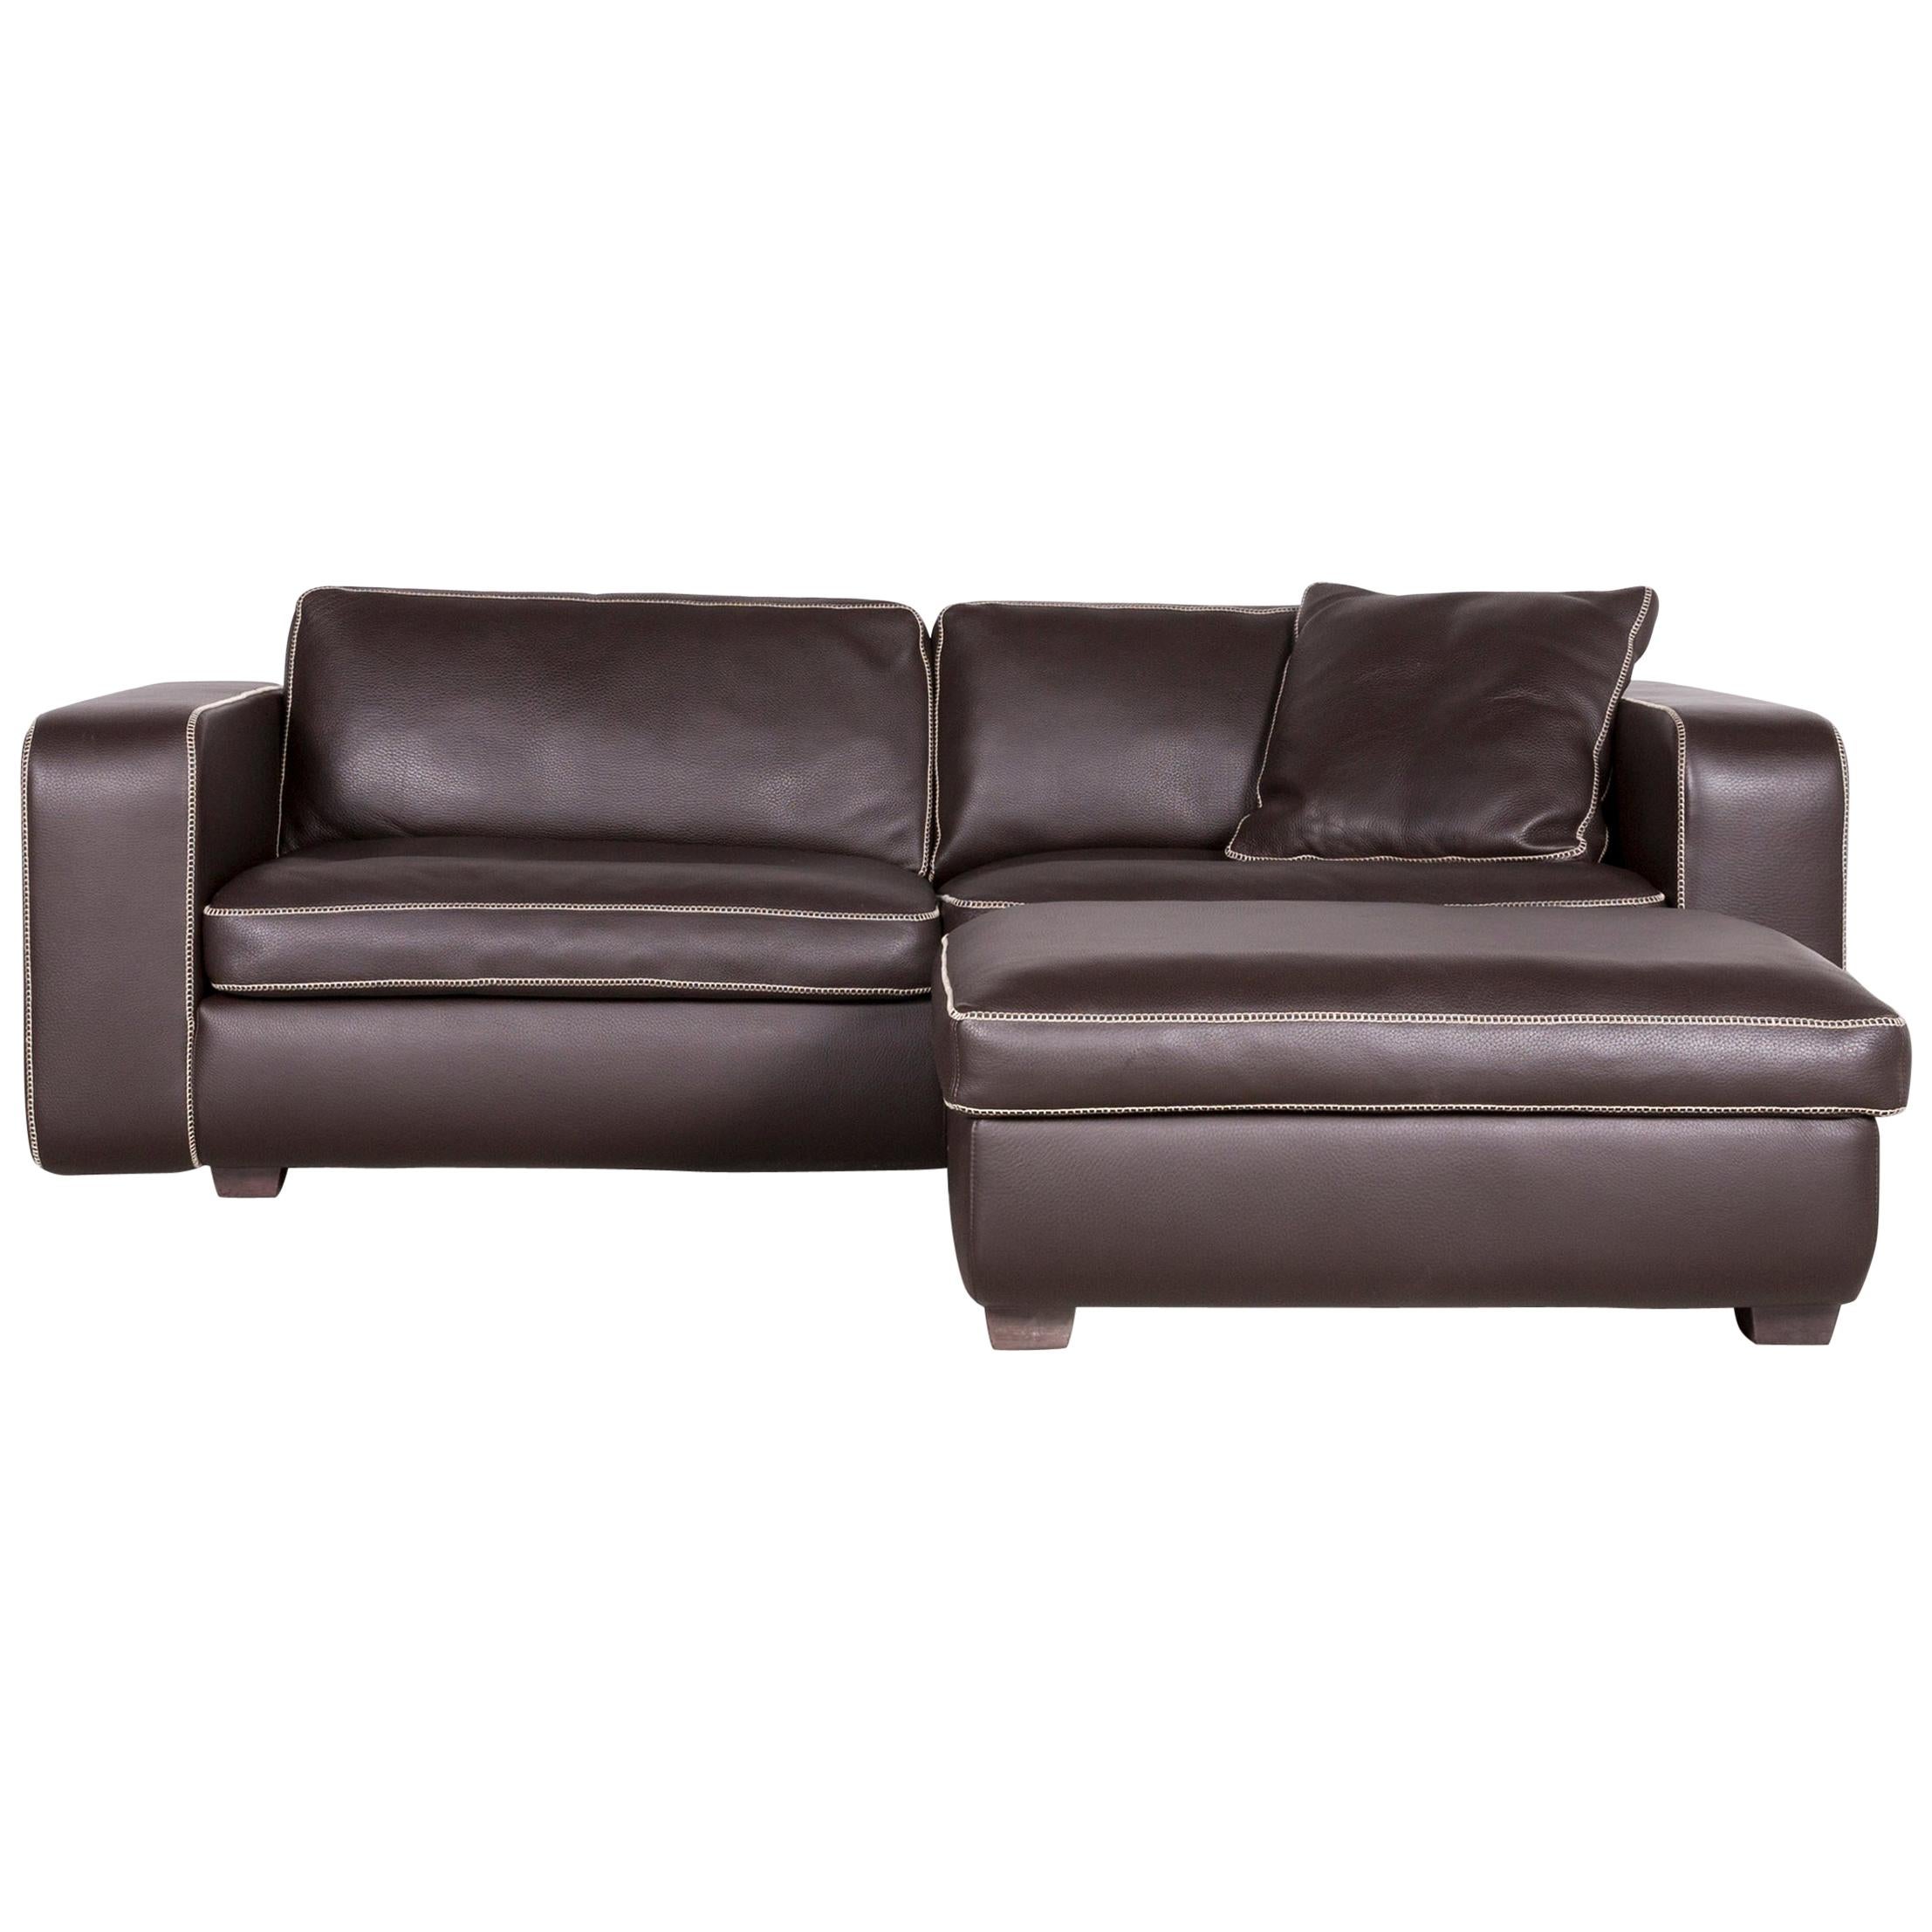 Machalke Valentino Designer Leather Sofa Footstool Set Brown Three-Seat Couch For Sale